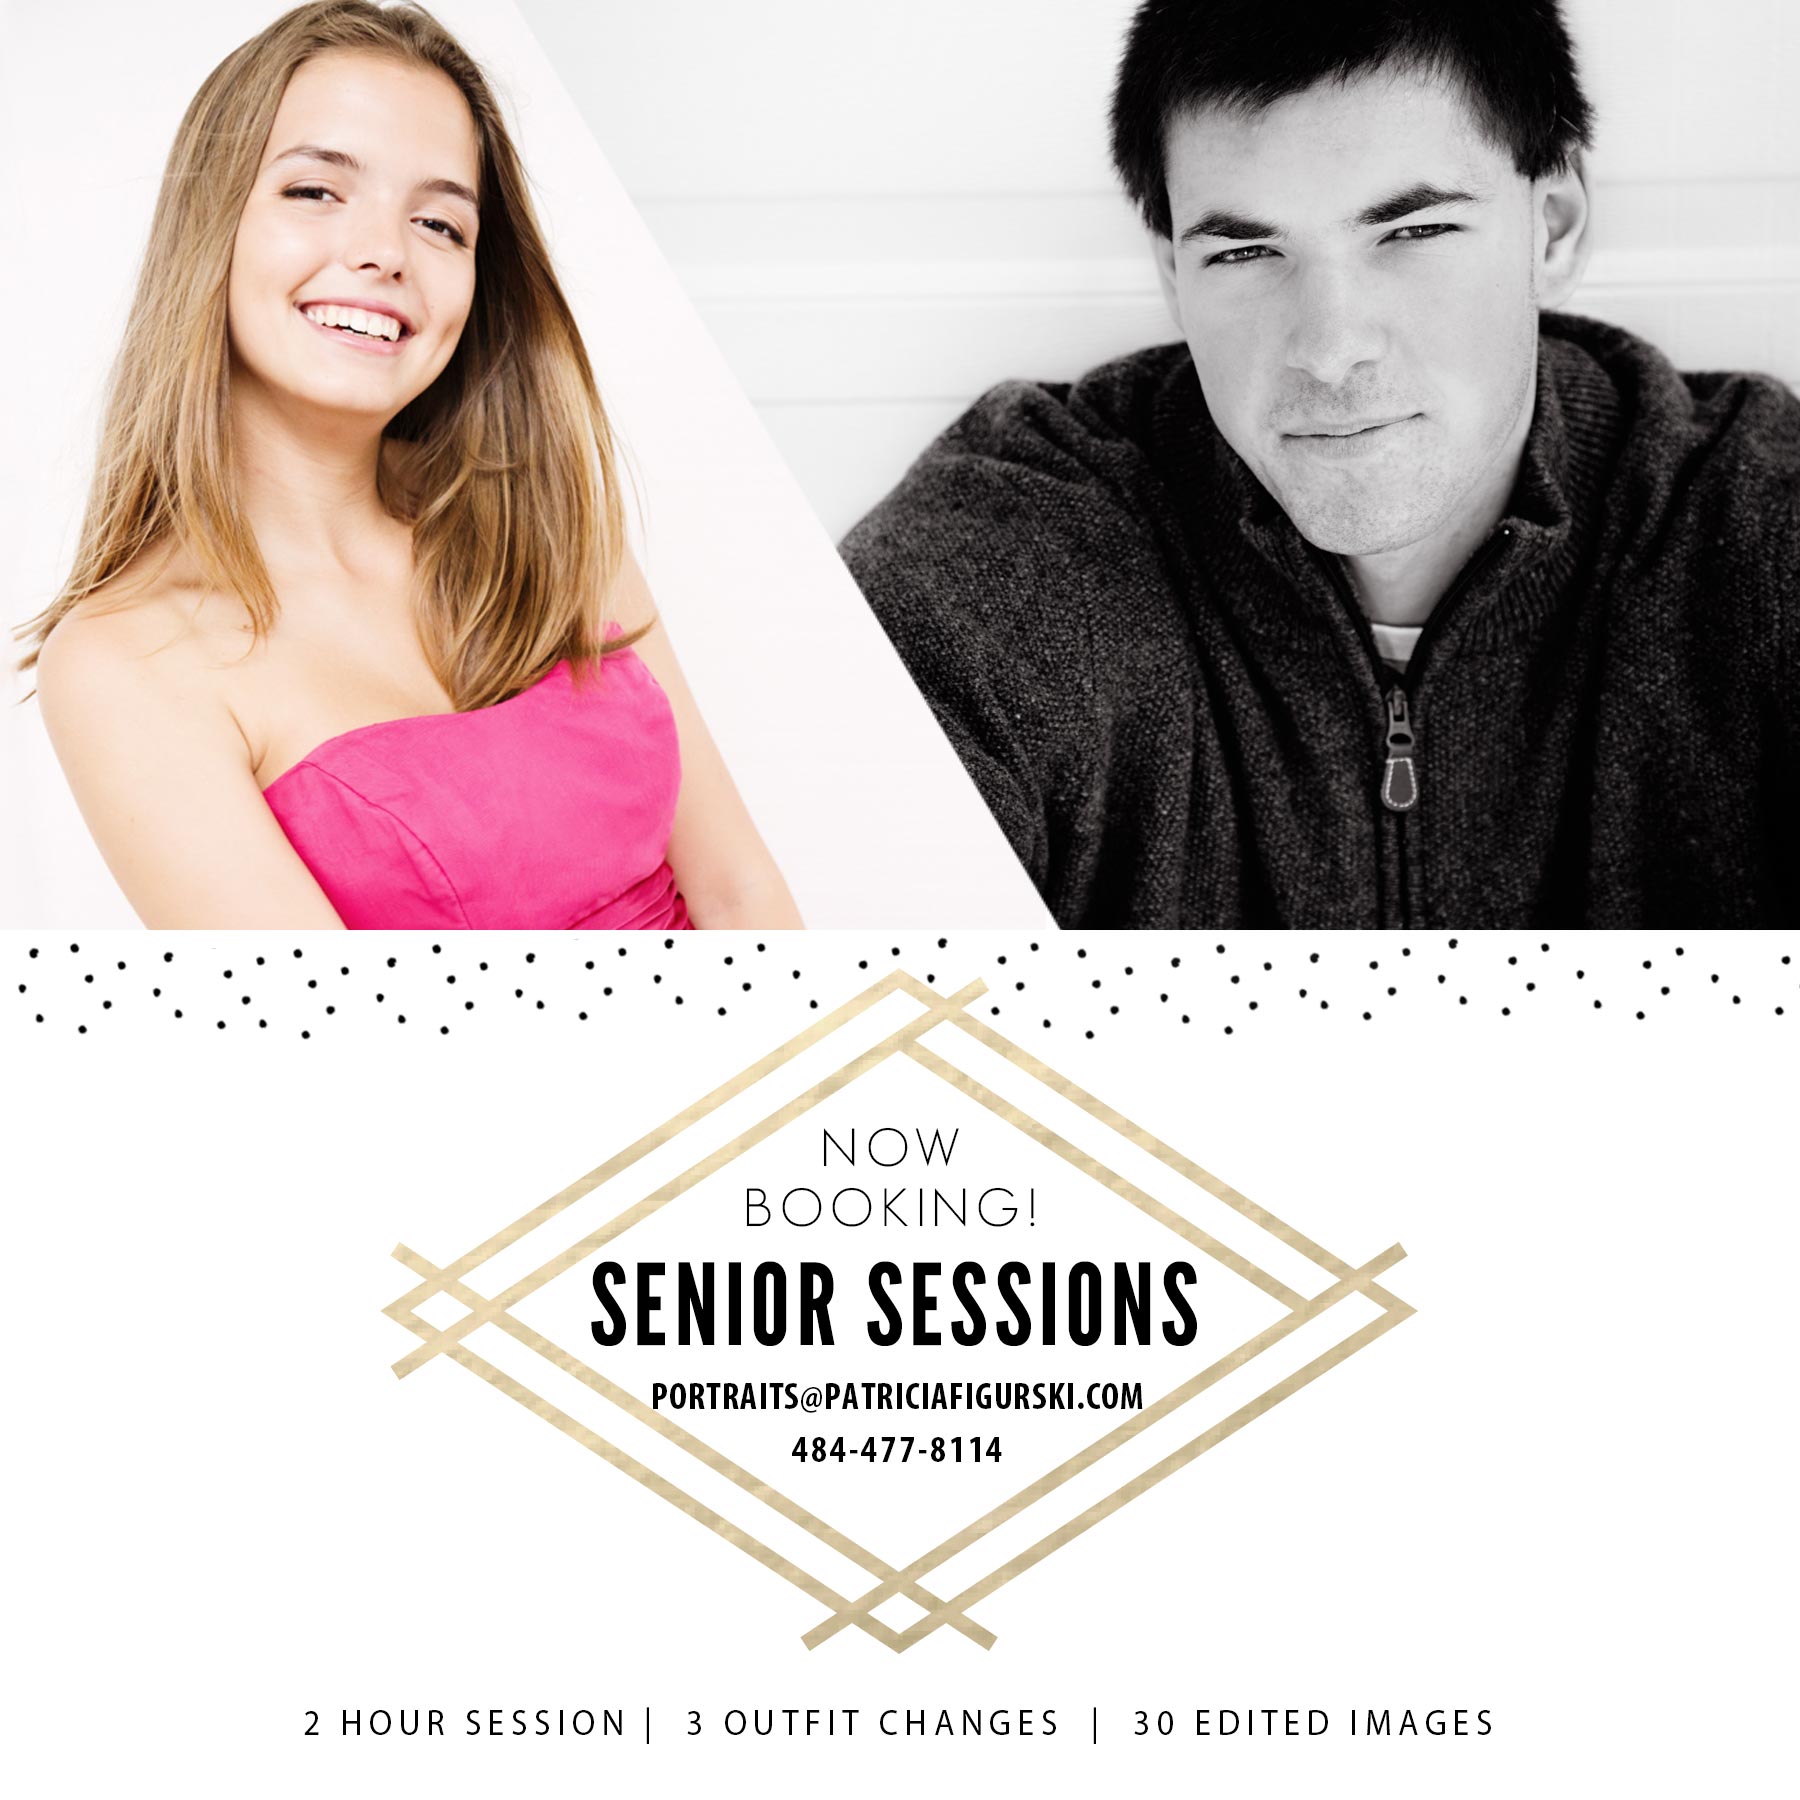 Photo Sessions for Seniors